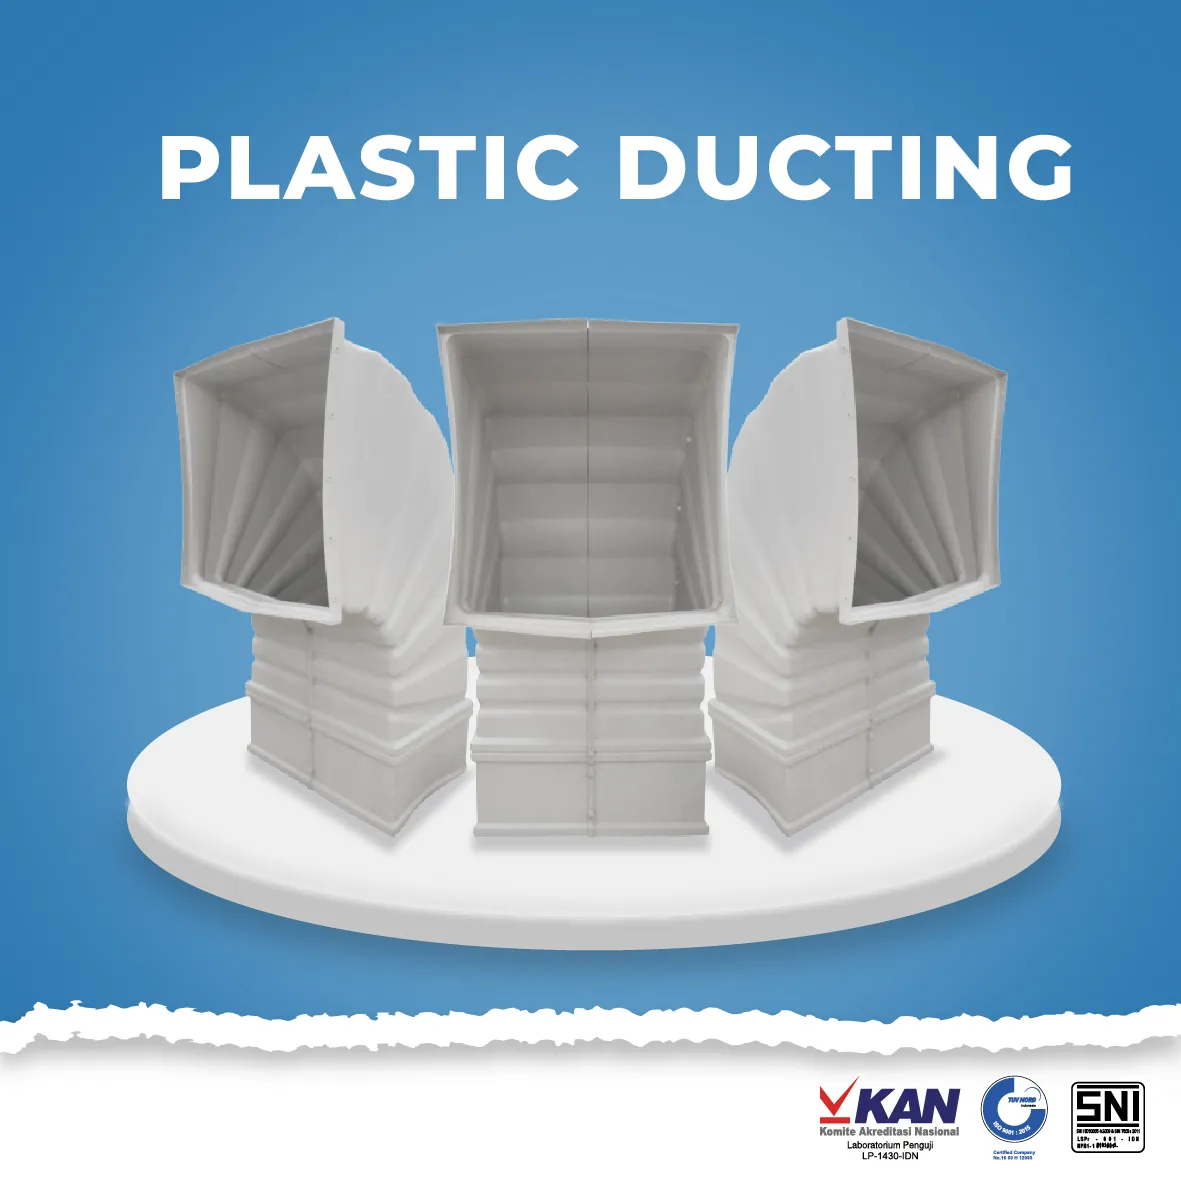  Plastic Ducting non fan template cover website 07